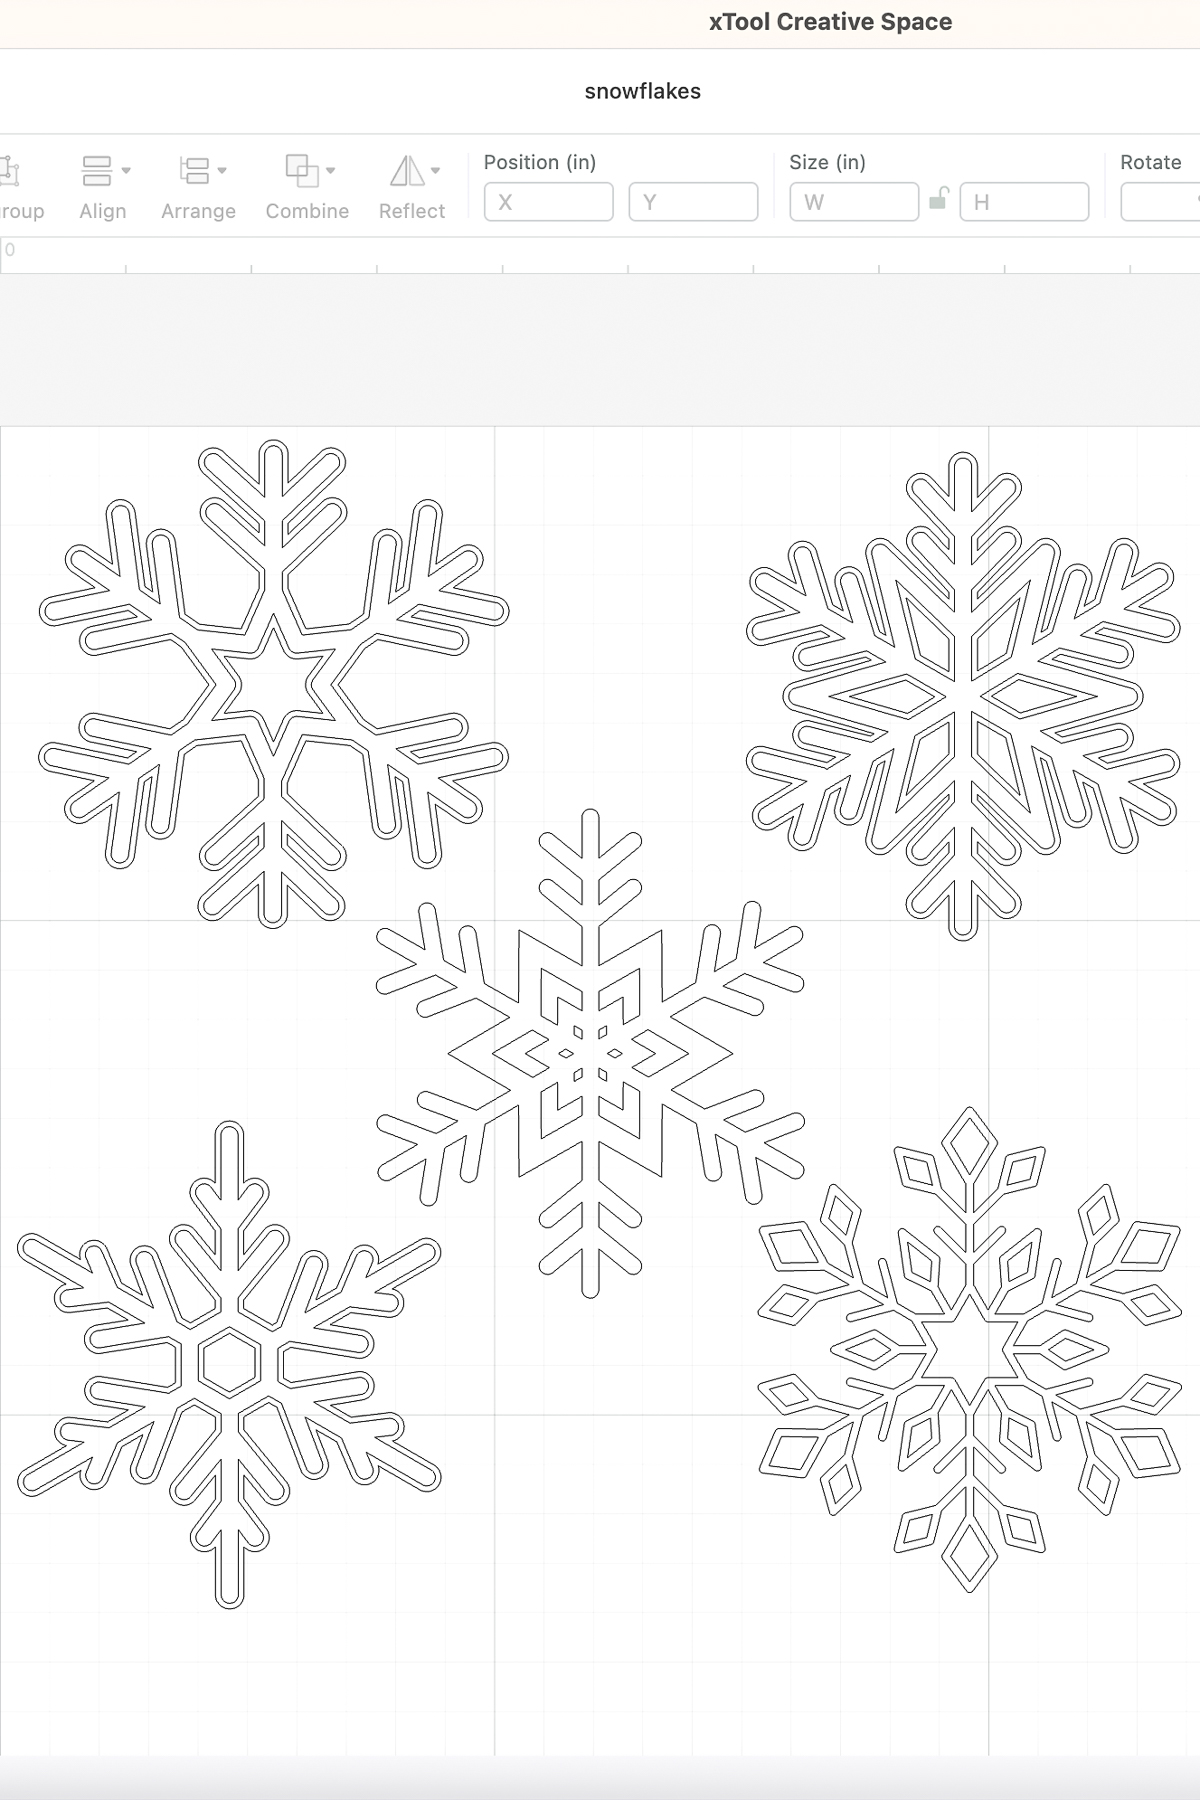 snowflake designs in xTool creative space